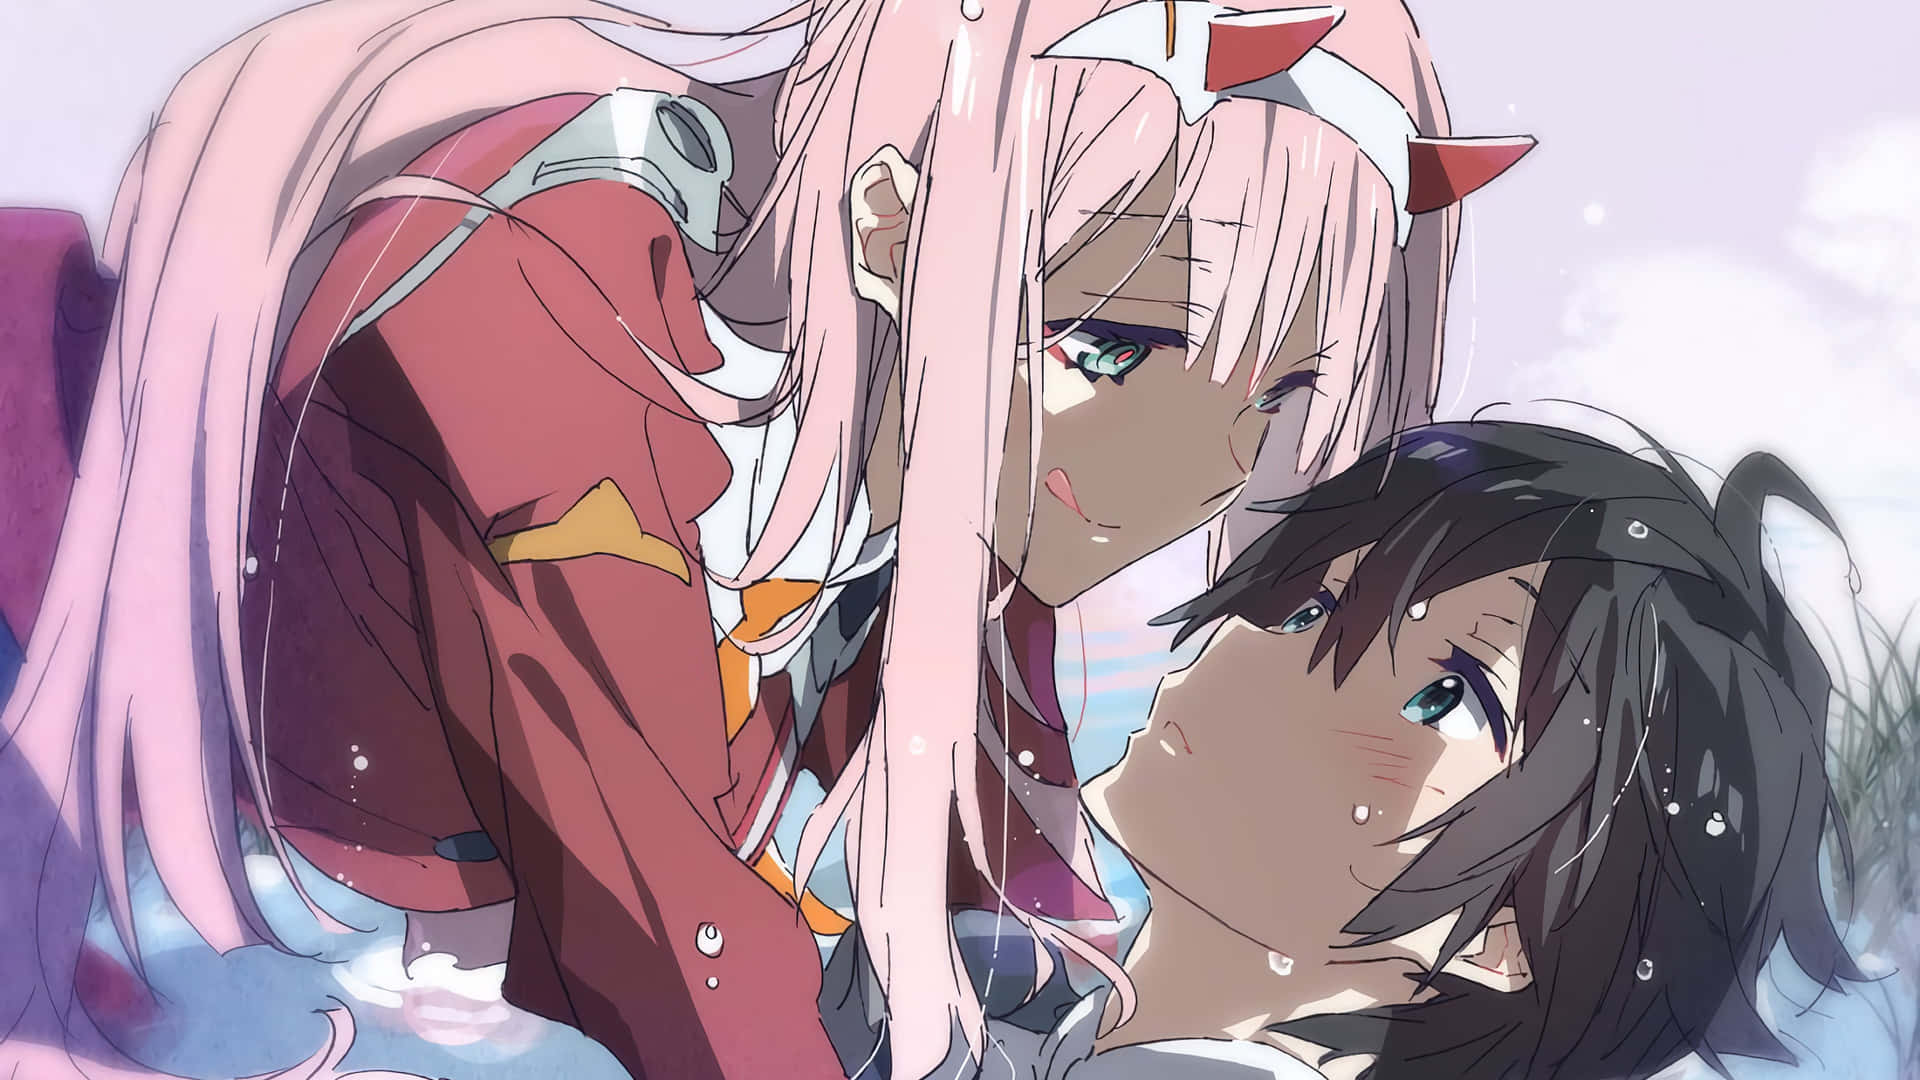 The protagonists of Darling in The Franxx face a journey of hope and despair